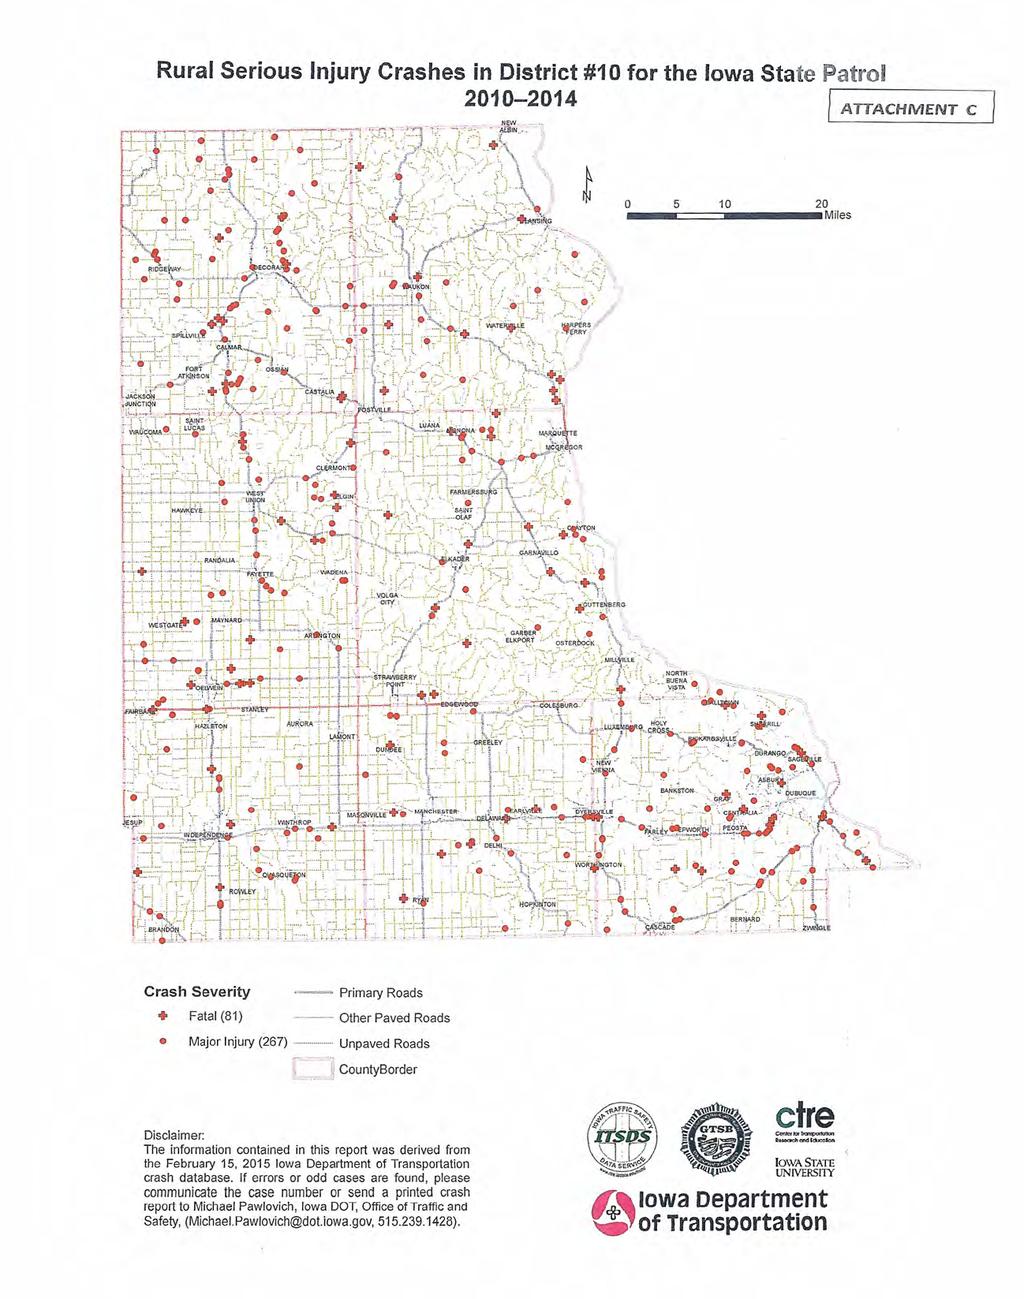 Rural Serious Injury Crashes in District #10 for the Iowa State Patrol 2010-2014 I~A-1T--A-C-H-M-E-N-T-C--.~-'--==-":Ti.',~,~, f=:::tl-~~-;-''--r:::.--;: ;,'-'1 ". /;- :.' "', 'A "''', '.